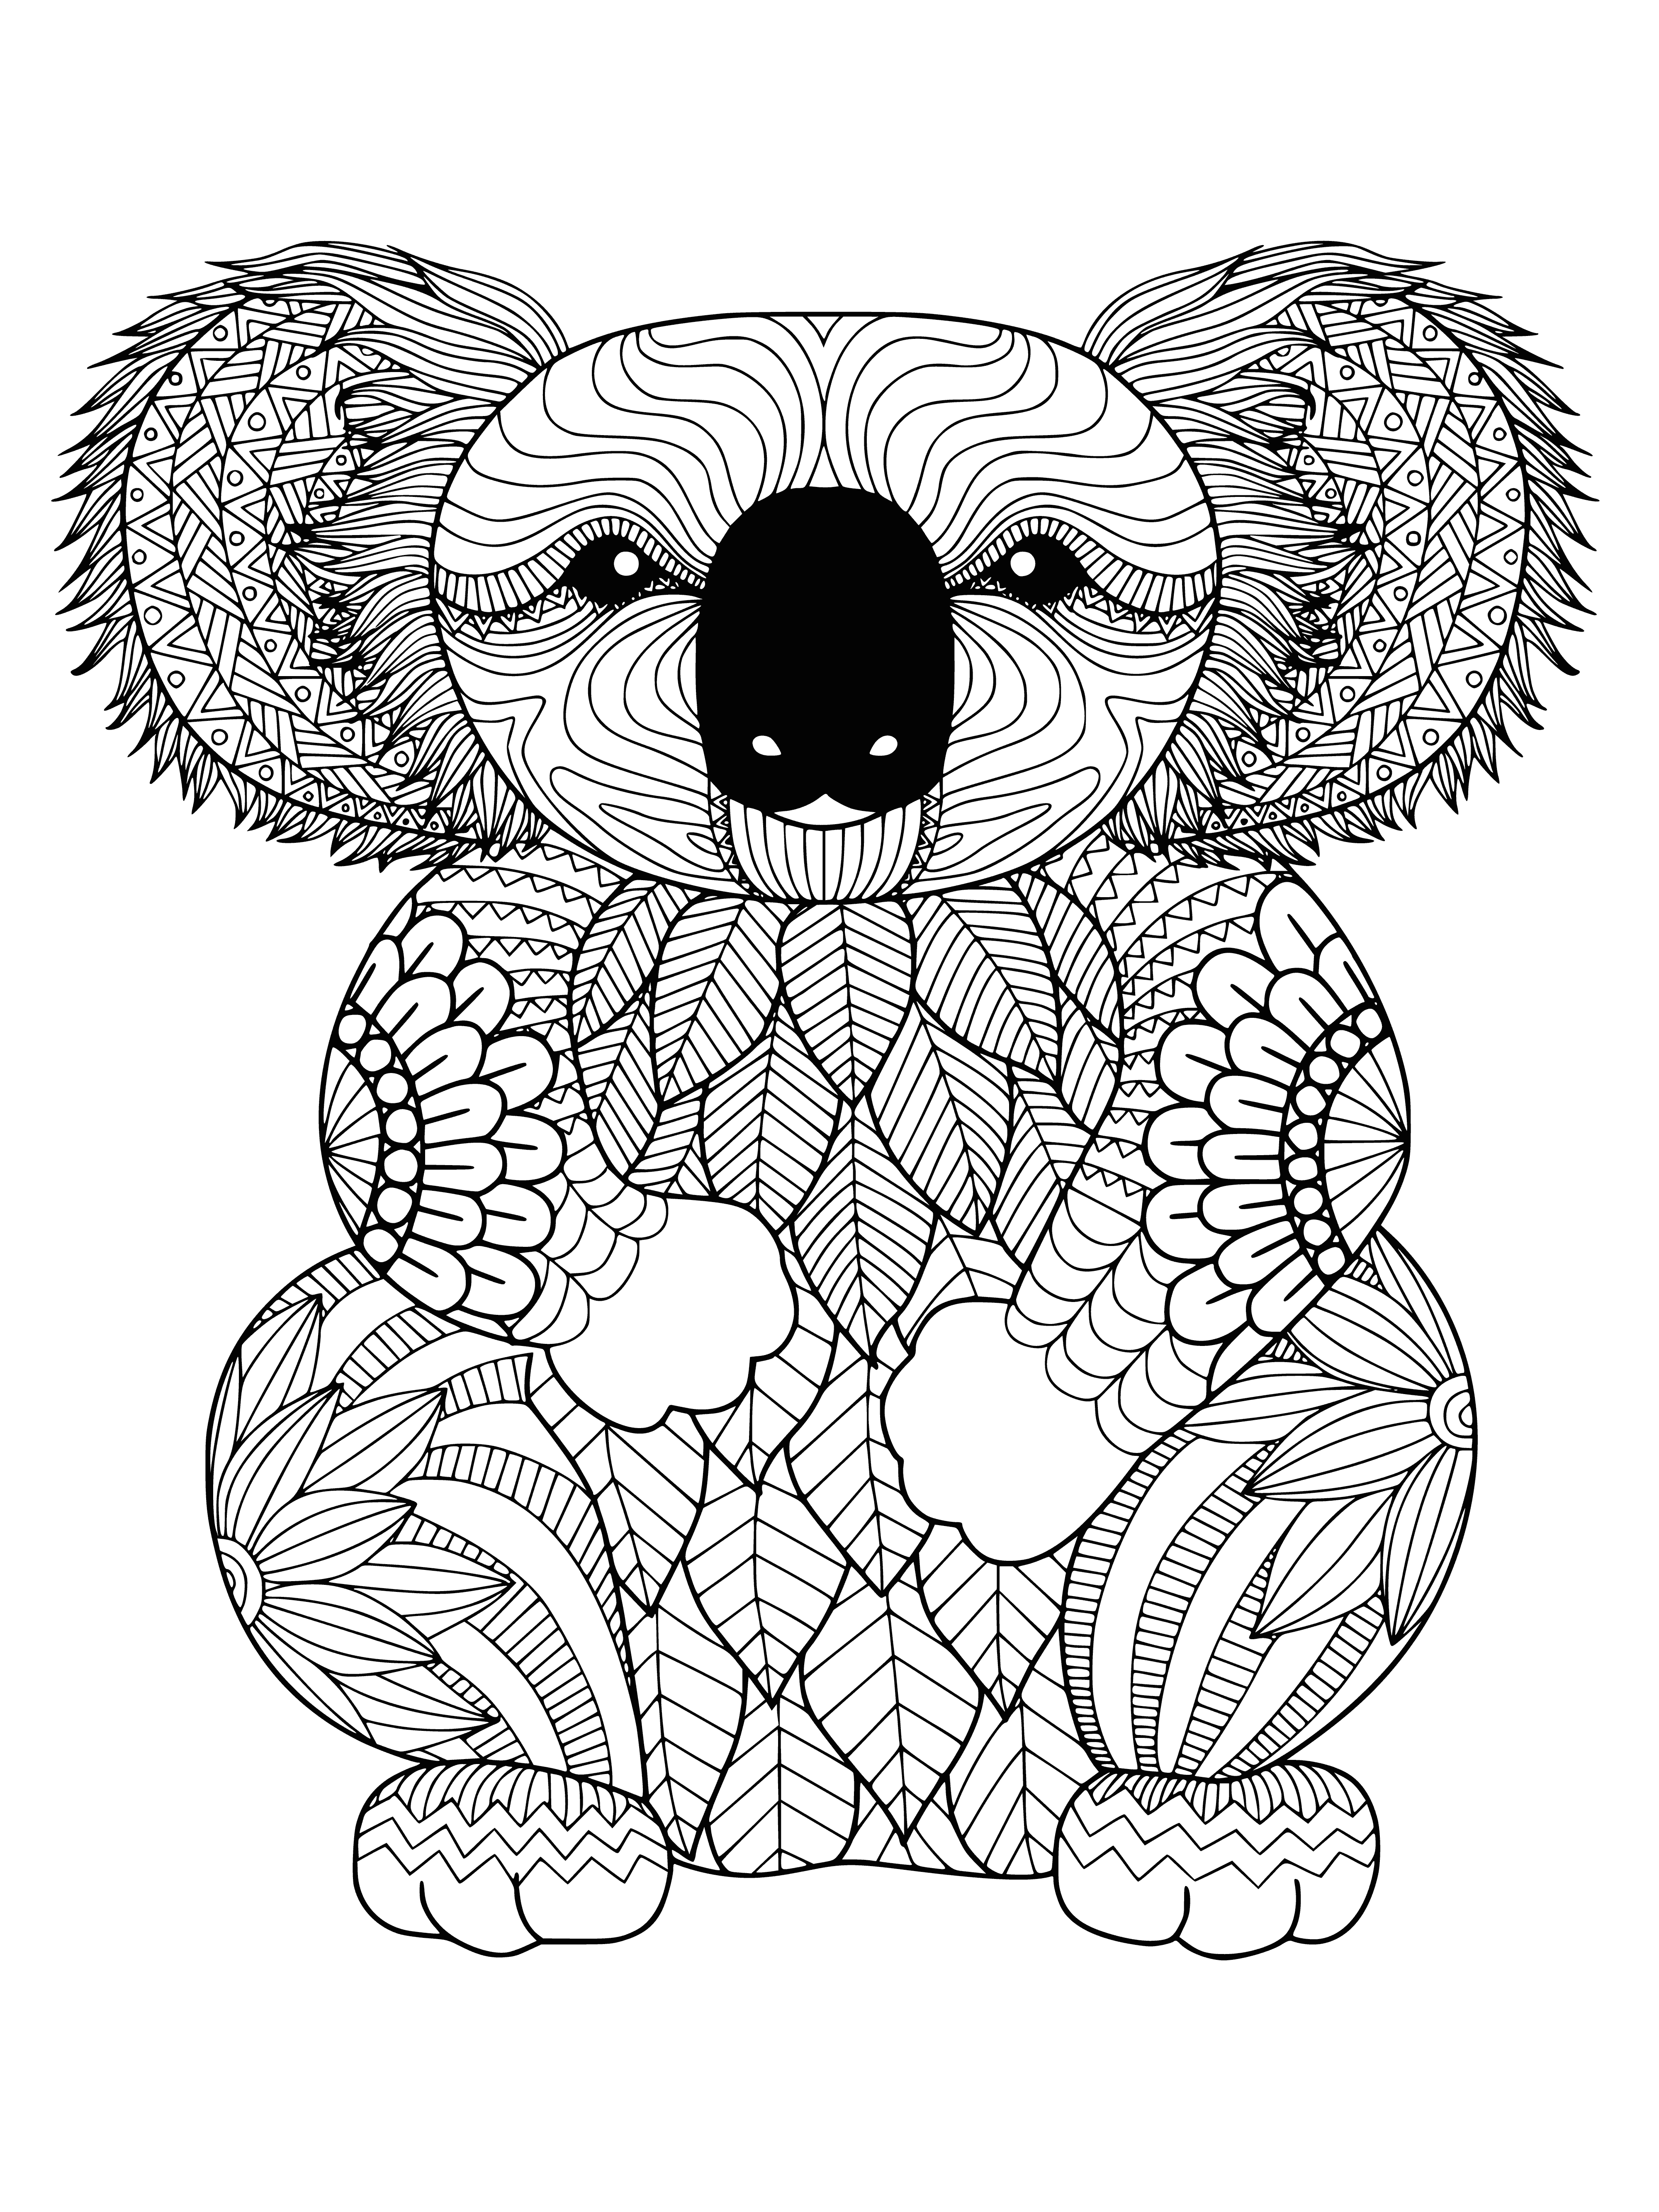 coloring page: Koala sits on a tree branch - grey fur, black nose; tree has green leaves, brown trunk.